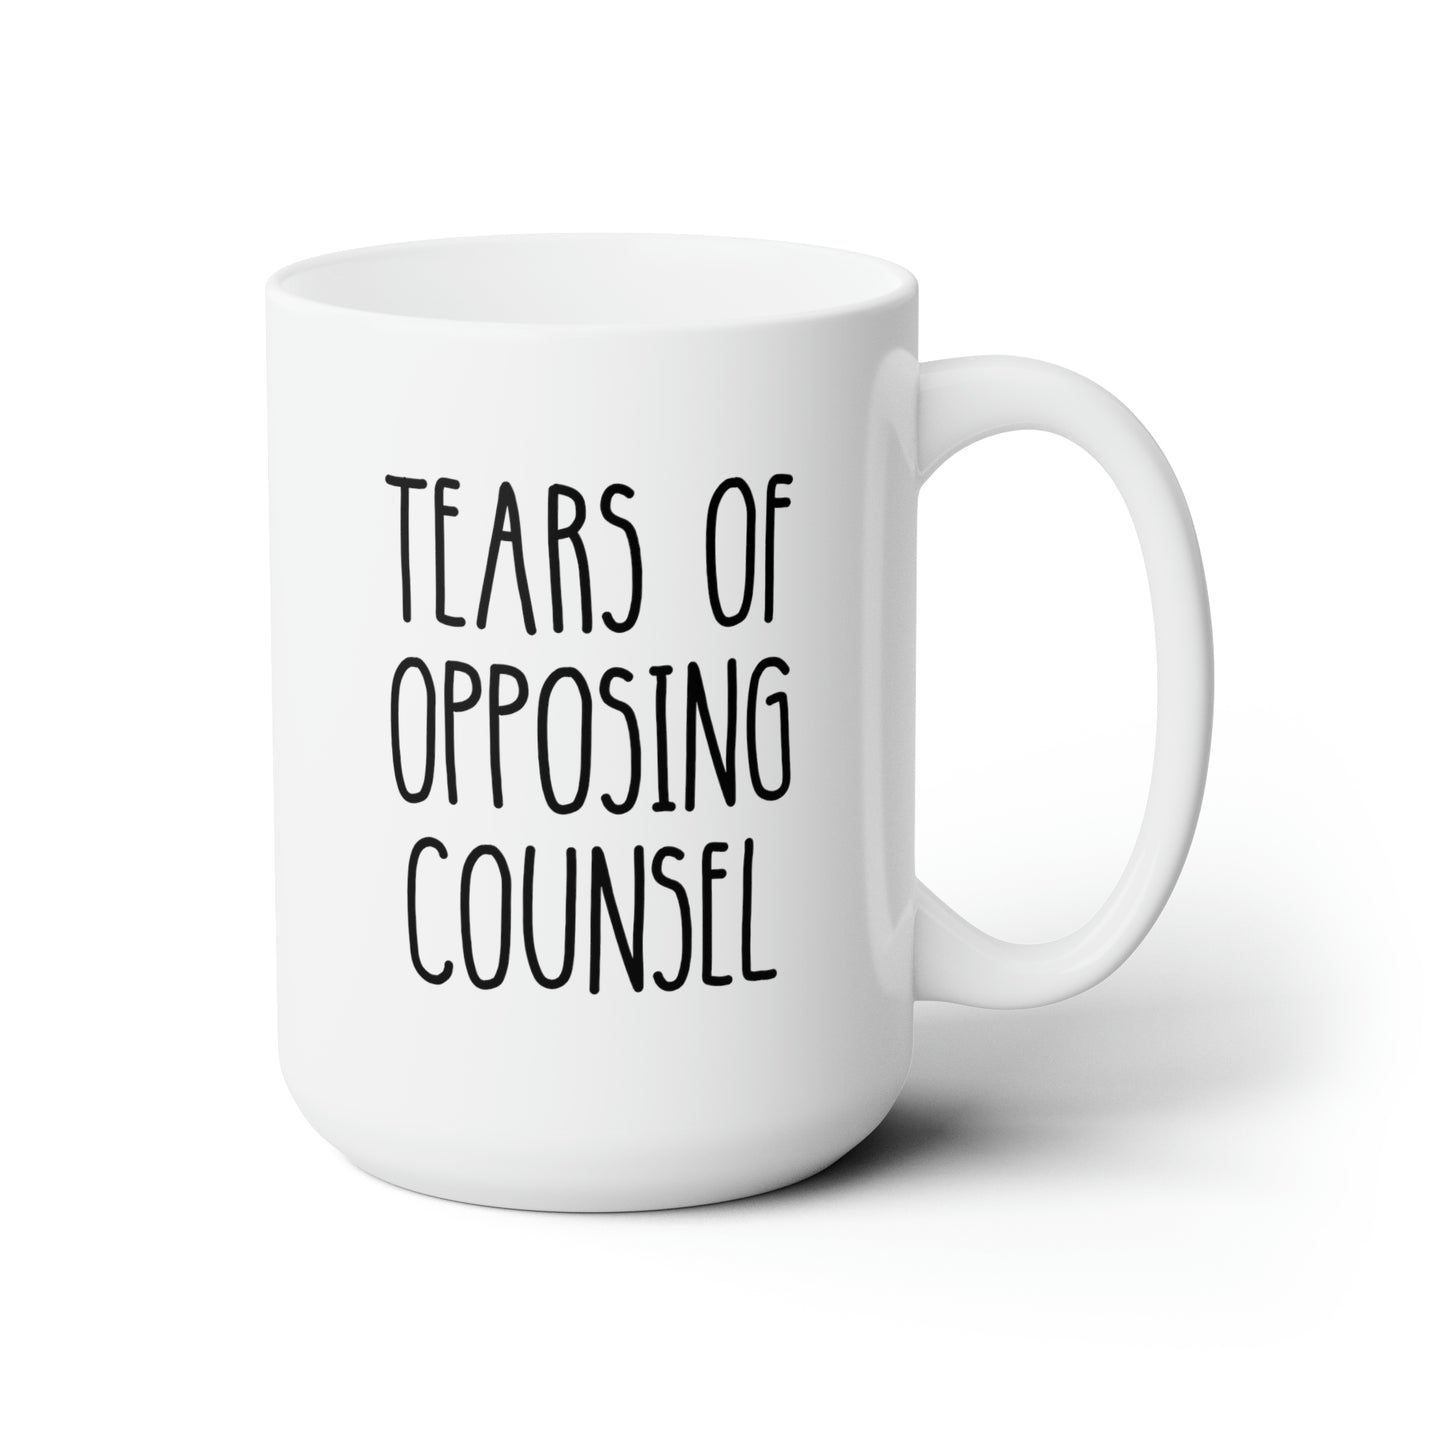 Tears Of Opposing Counsel 15oz white funny large coffee mug gift for lawyer law student graduation solicitor attorney prosecutor waveywares wavey wares wavywares wavy wares